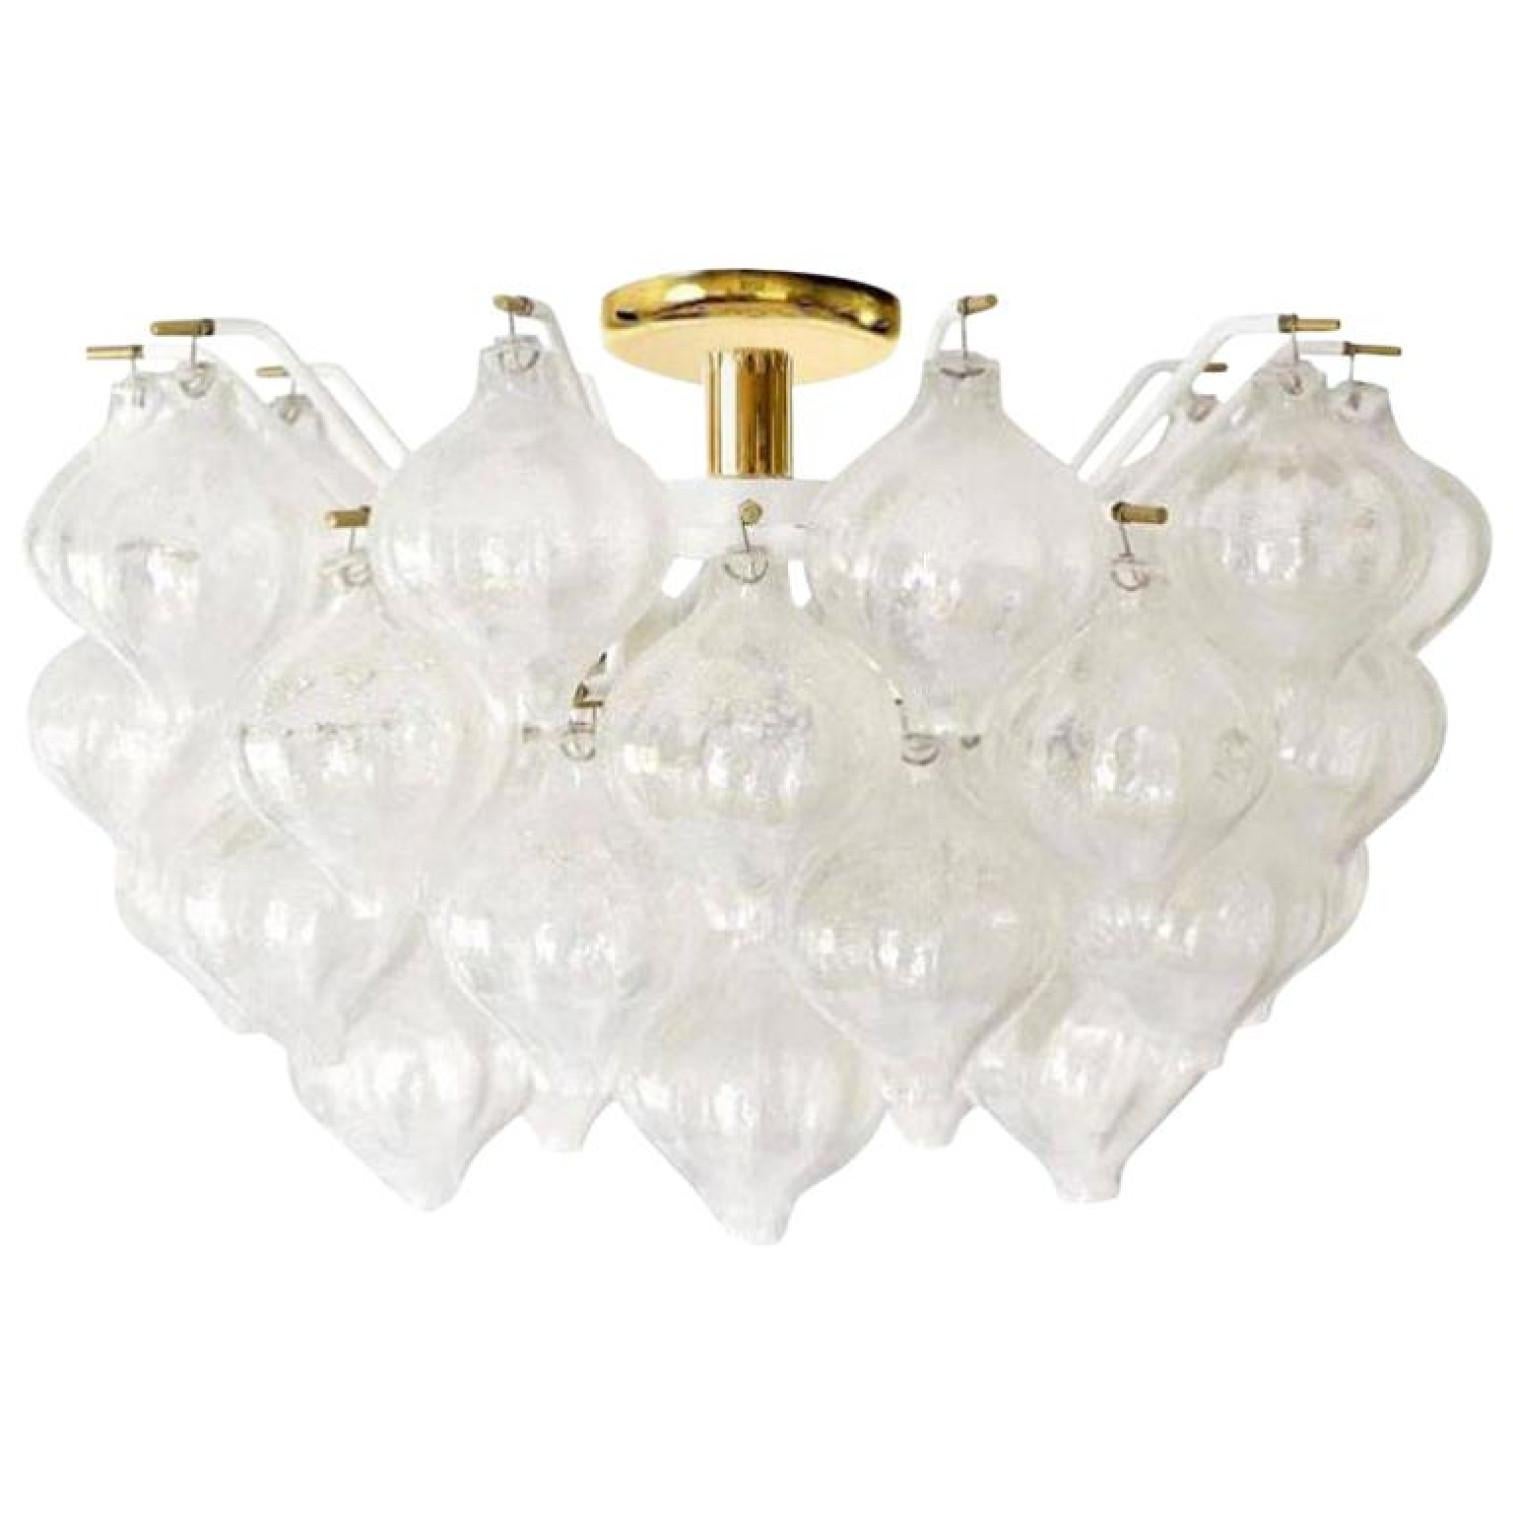 An exceptional 'Tulipan' flush mount chandelier by J.T. Kalmar, Austria, Vienna, manufactured in the midcentury, circa 1960 (late 1960s-early 1970s). With beautiful Murano Tulipan shaped hand blown bubble glasses. Several glasses are mounted with